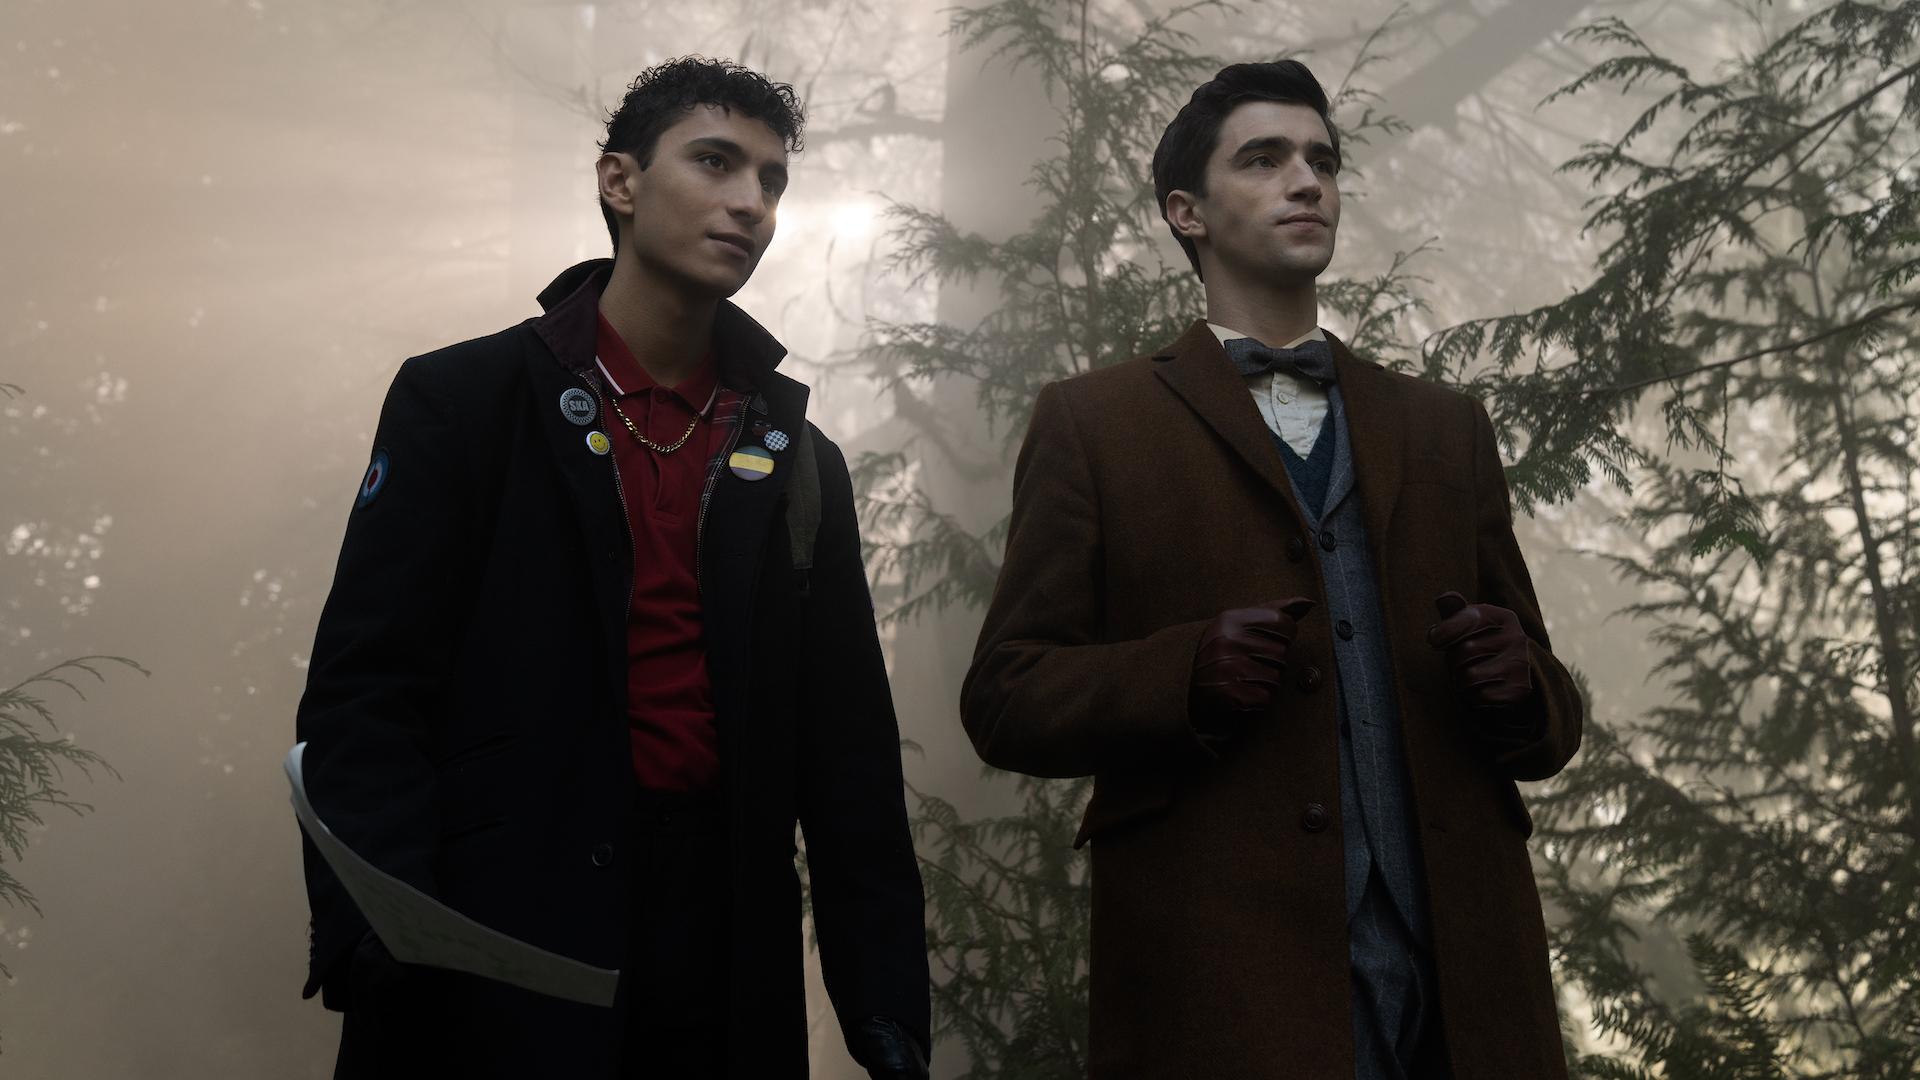 Two young men in a foggy forest, one wearing a dark blazer and the other in a black jacket; still from 'Dead Boy Detectives'